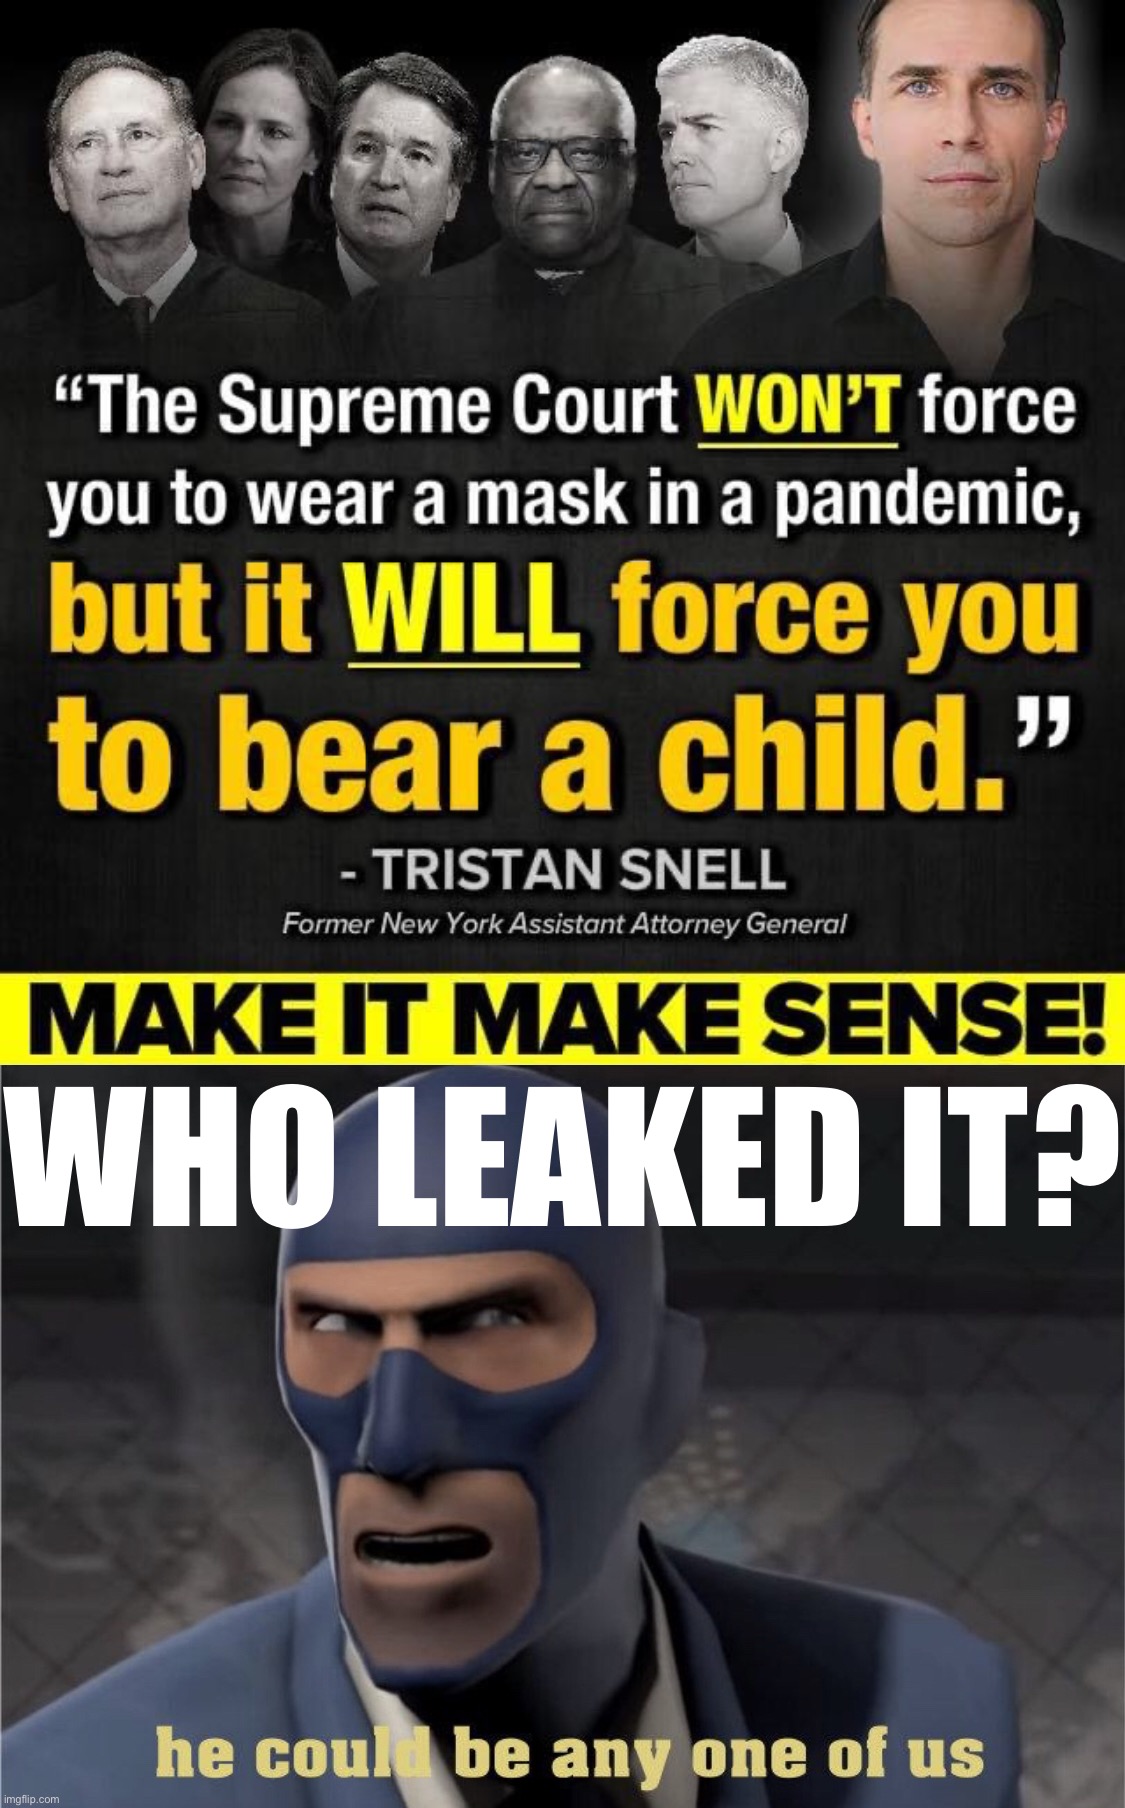 WHO LEAKED IT? | image tagged in scotus hypocrisy,he could be any one of us | made w/ Imgflip meme maker